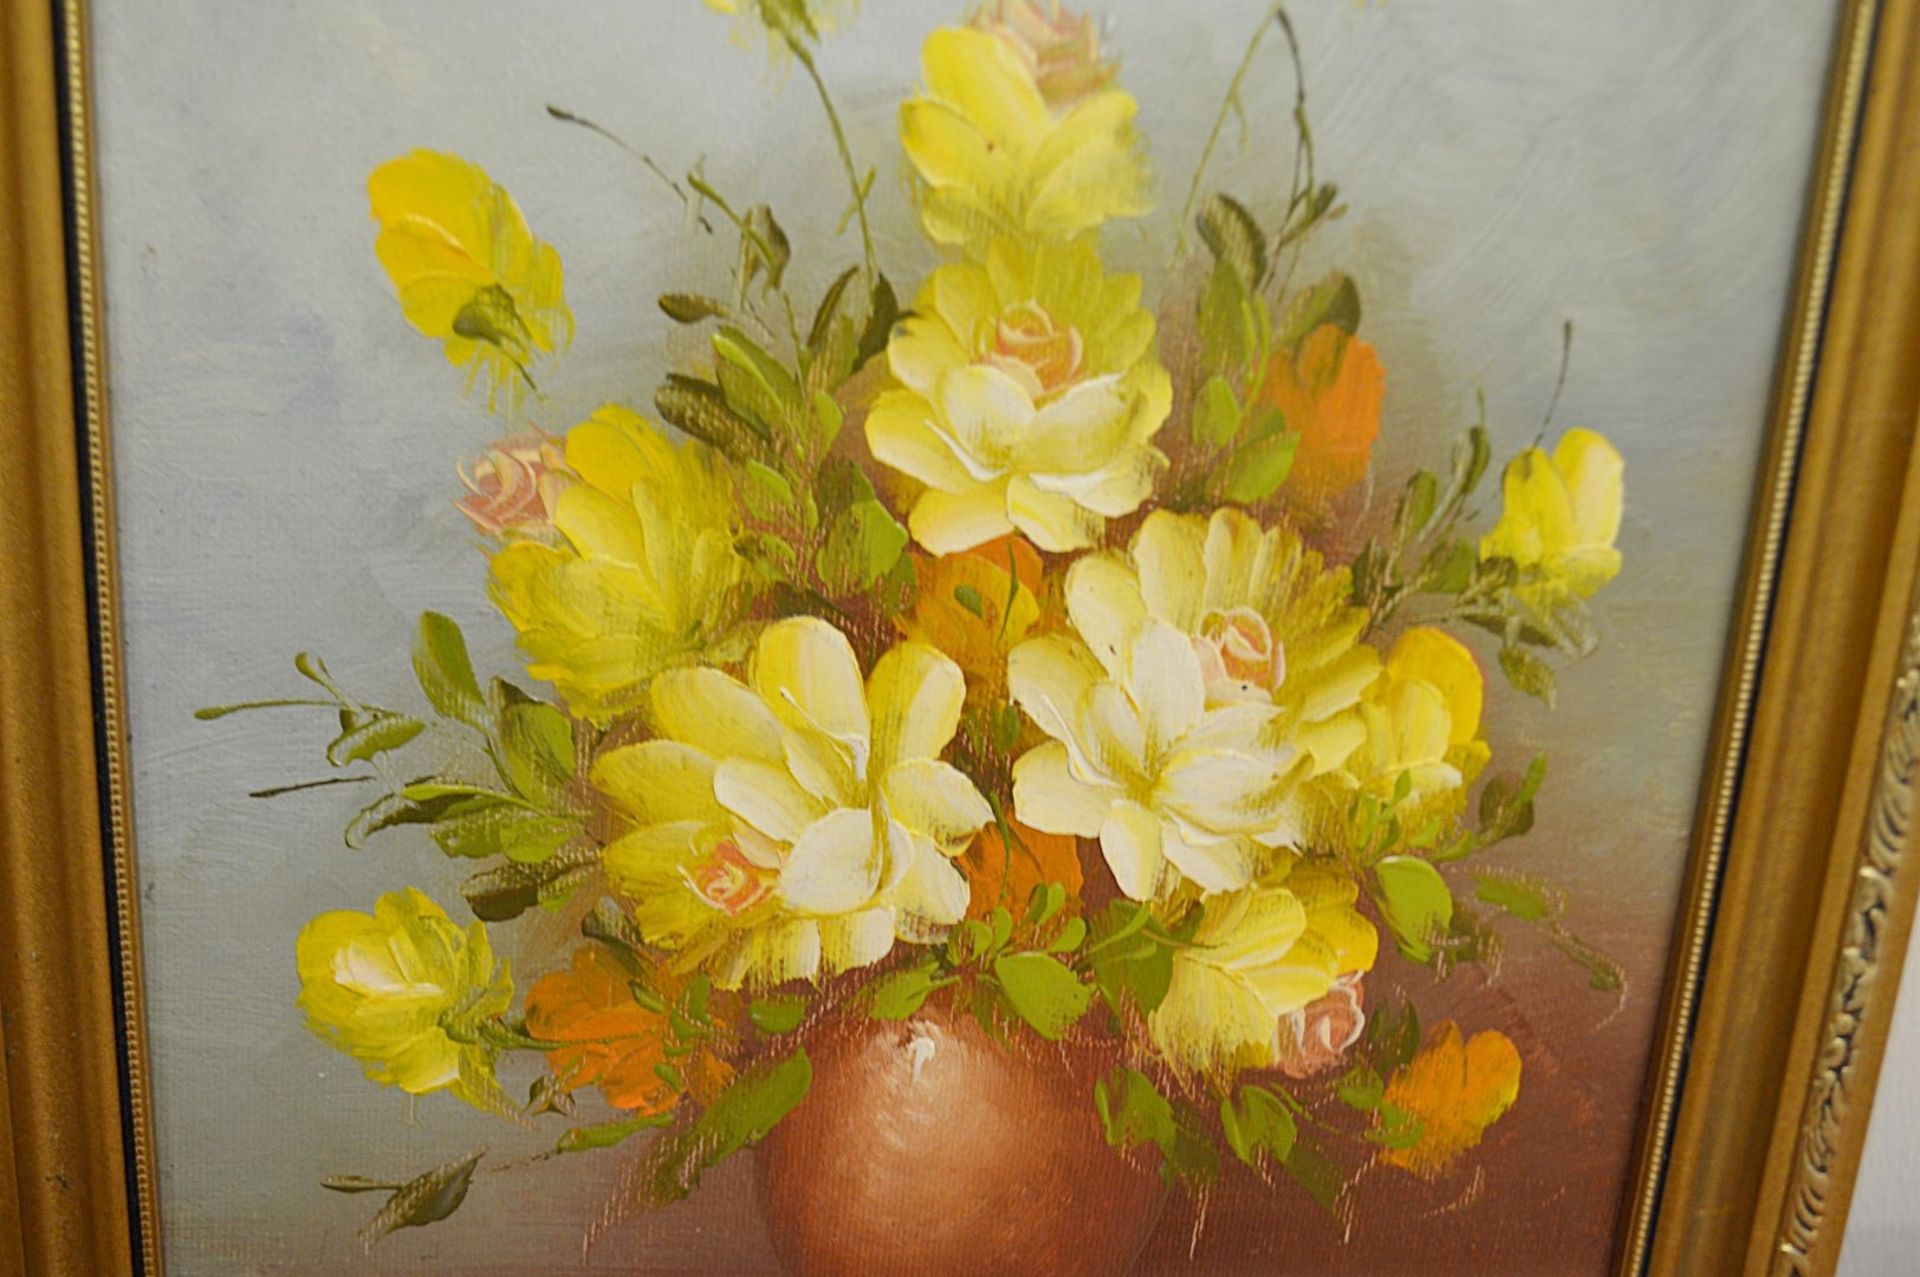 1 x Original Oil Painting Of Flowers On Board - Signed By The Artist - Dimensions: 25 x 30cm - - Image 3 of 6